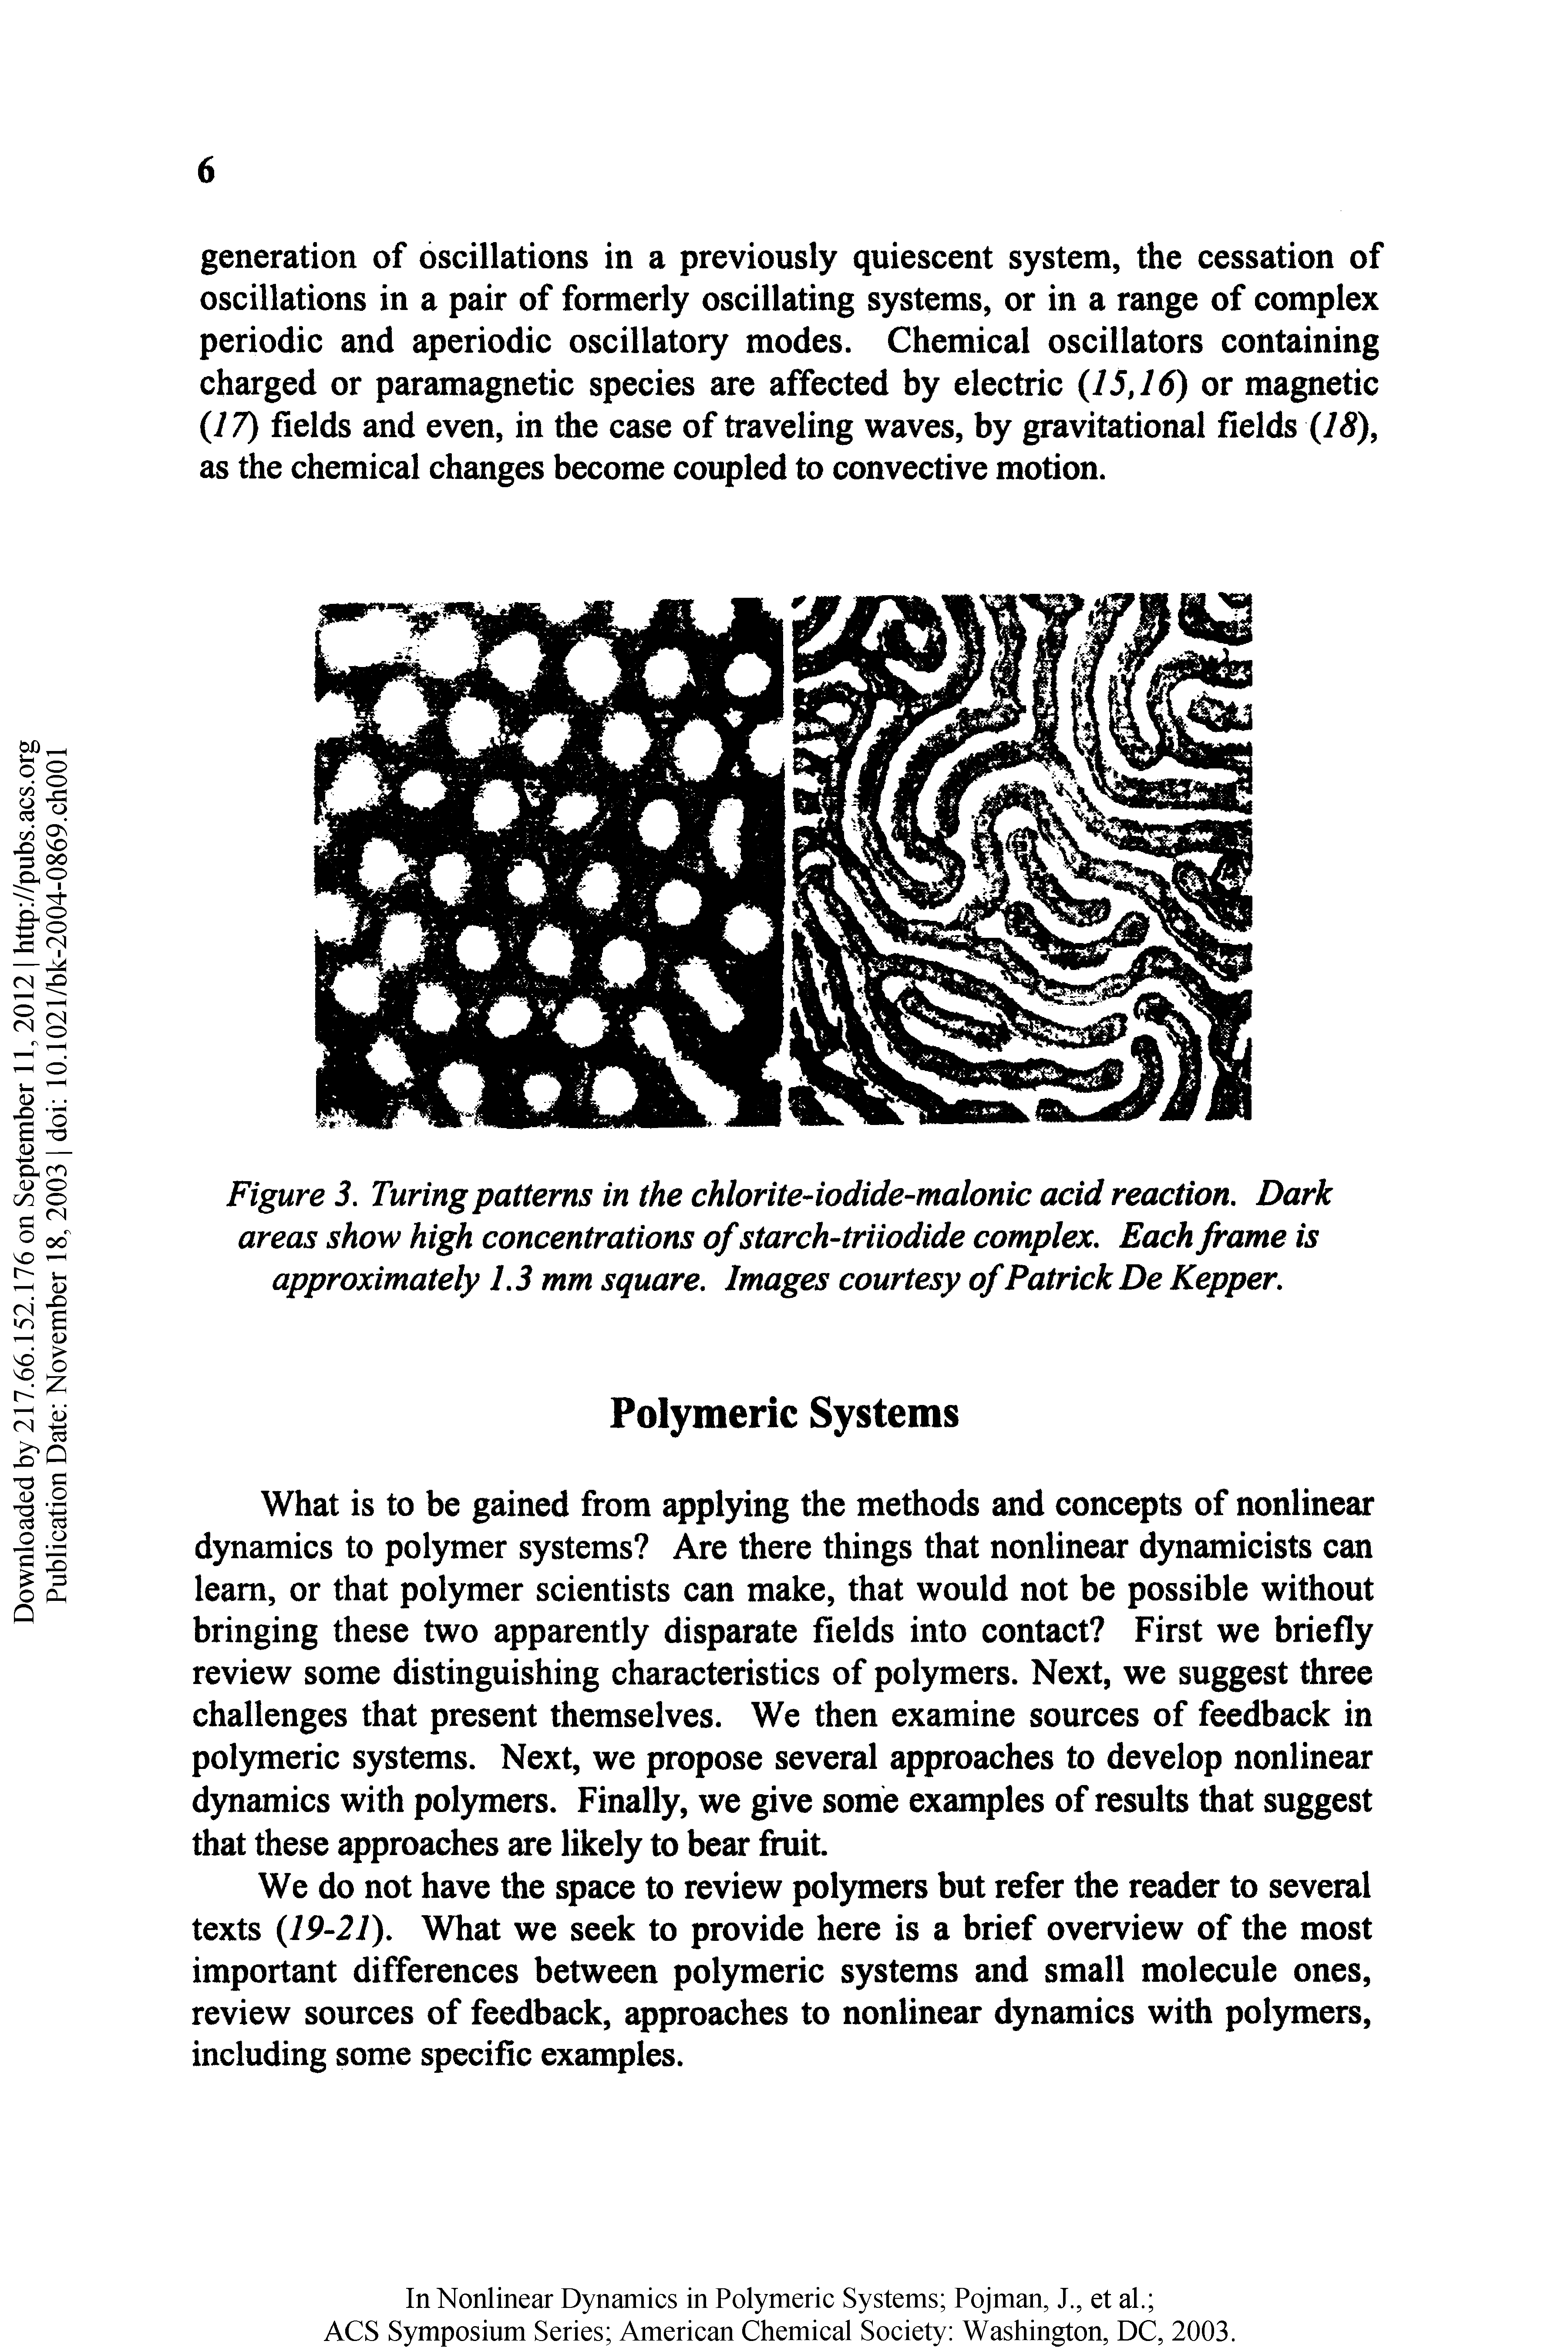 Figure 3. Turing patterns in the chlorite-iodide-malonic acid reaction. Dark areas show high concentrations of starch-triiodide complex. Each frame is approximately 1,3 mm square. Images courtesy of Patrick De Kepper,...